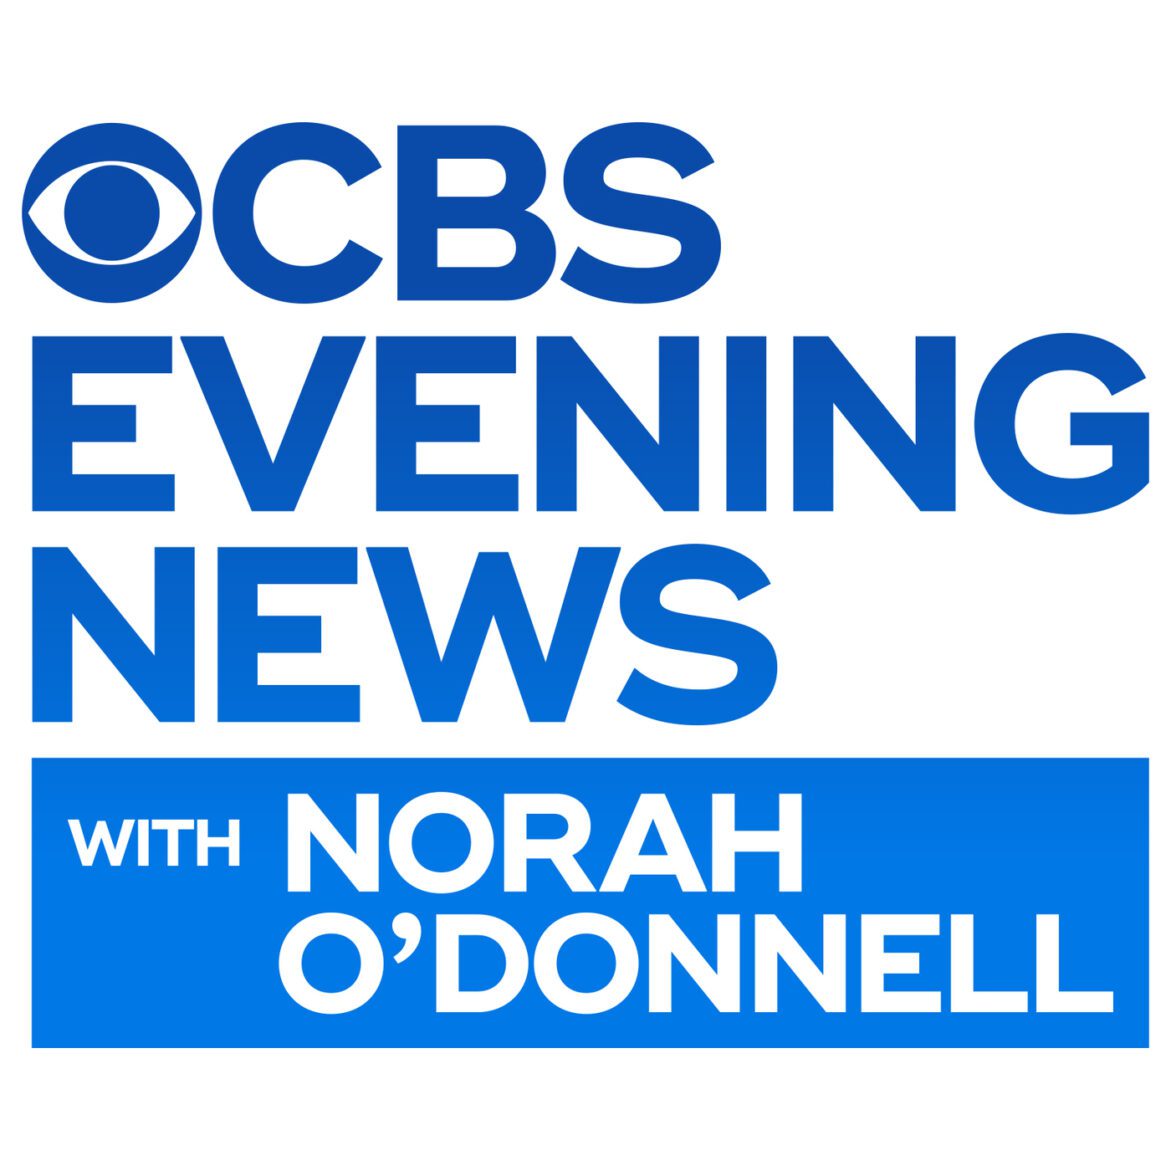 Black Podcasting - CBS Evening News with Norah O'Donnell, 09/24